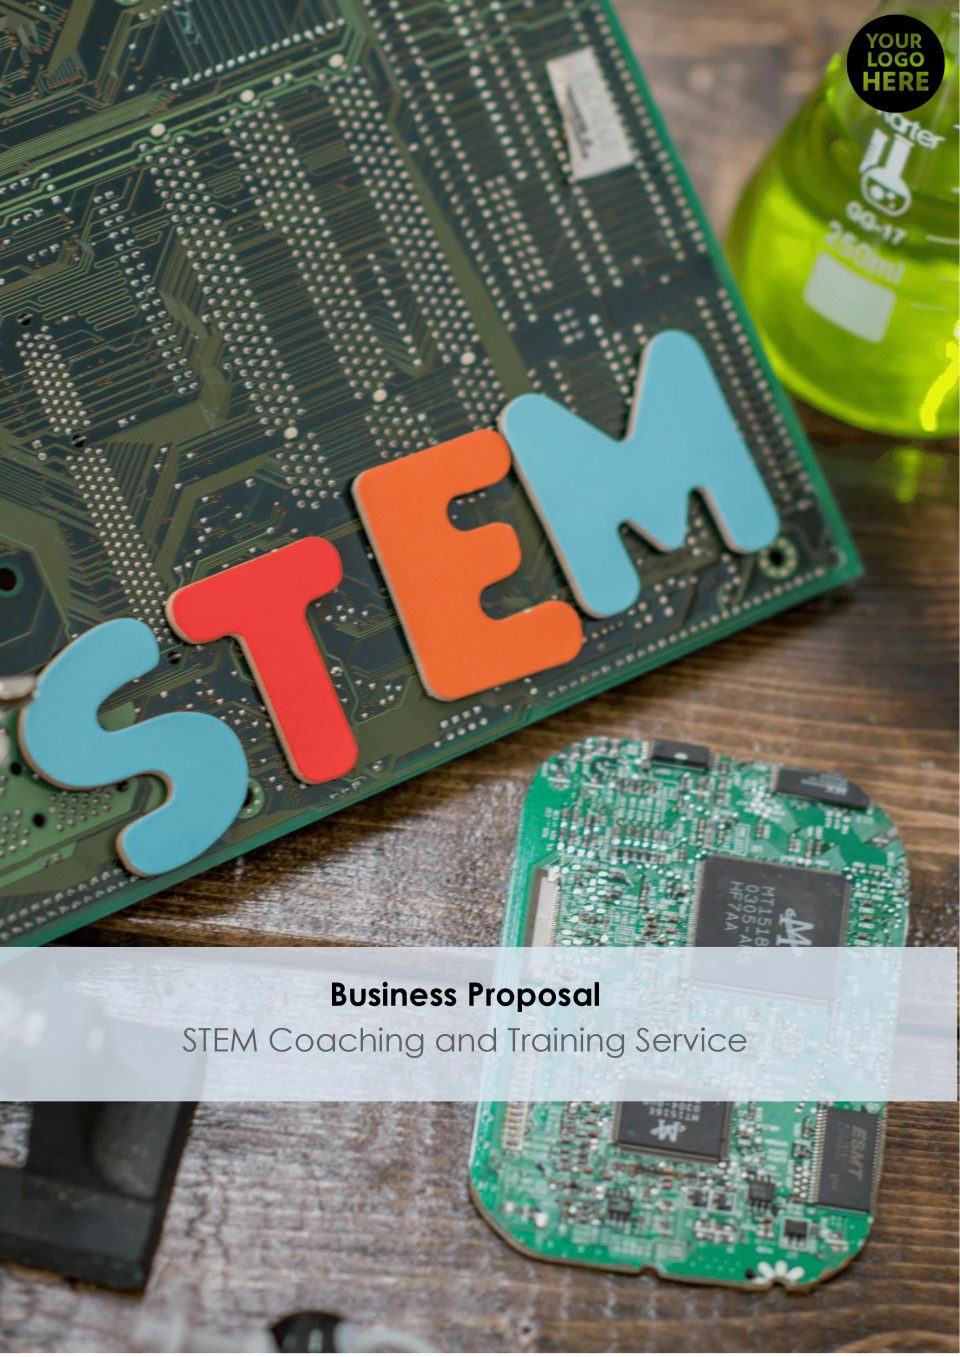 STEM Coaching and Training Service Proposal Template 01 scaled